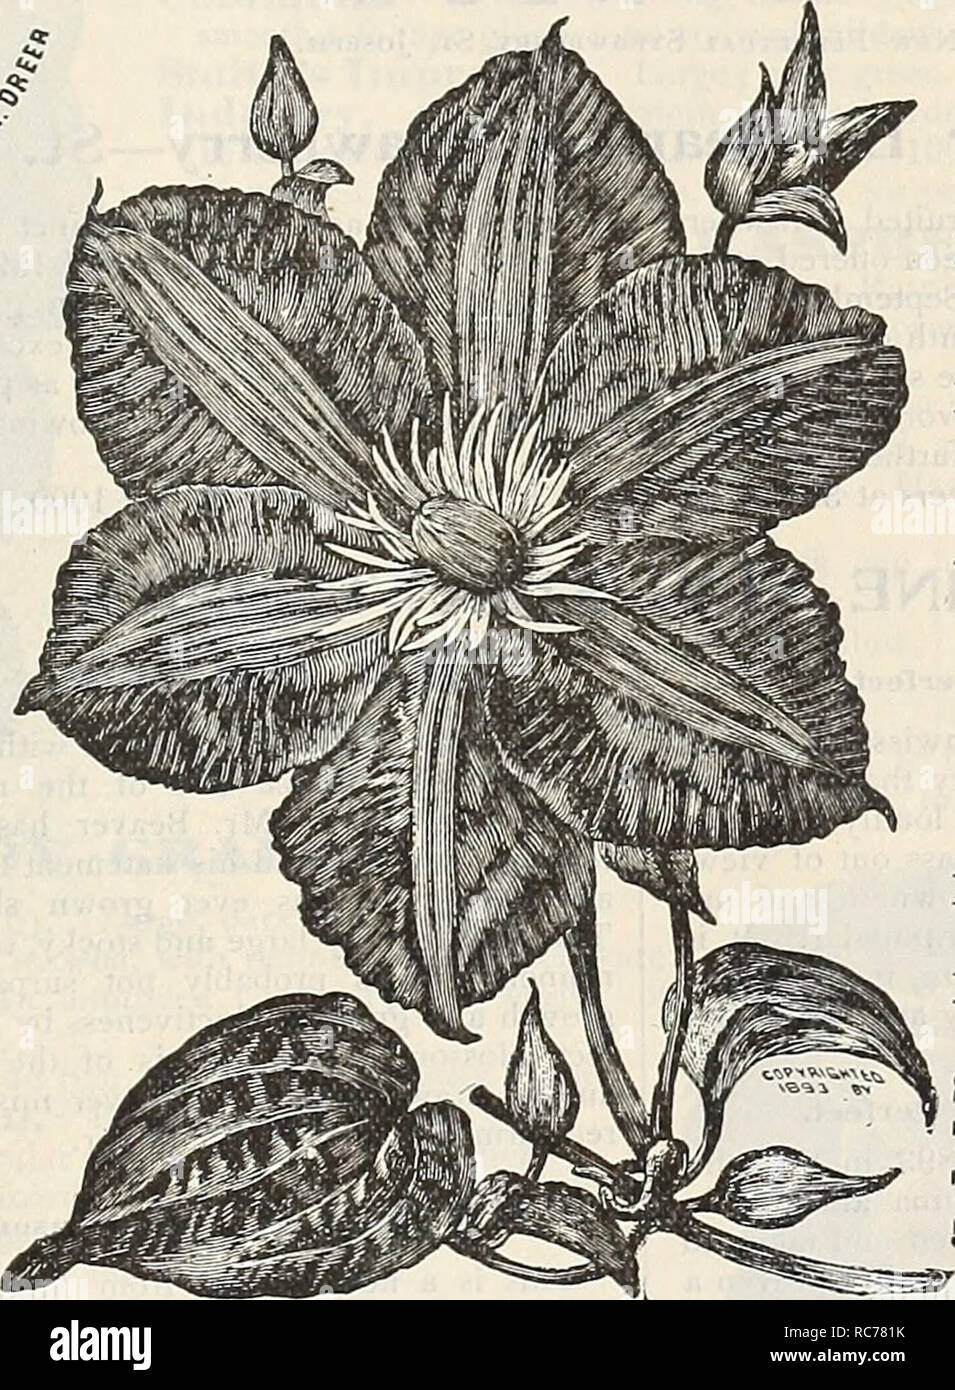 . Dreer's garden calendar : 1900. Seeds Catalogs; Nursery stock Catalogs; Gardening Equipment and supplies Catalogs; Flowers Seeds Catalogs; Vegetables Seeds Catalogs; Fruit Seeds Catalogs. Small Flower- ing Clematis. Clematis Cocciuea. A very handsome, hardy climber, bearing thick bell-shaped flowers of a bright coral-red color; bloums with wonderful profusion from June un- til frost. 25 cts. each; 5 for 11.00. Clematis Crispa. A very beautiful species, bearing an abundance of pretty bell-shaped, fragrant, lavender flow- ers with white centre. Blooms from June until frost, 25 cts. each; 5 for Stock Photo